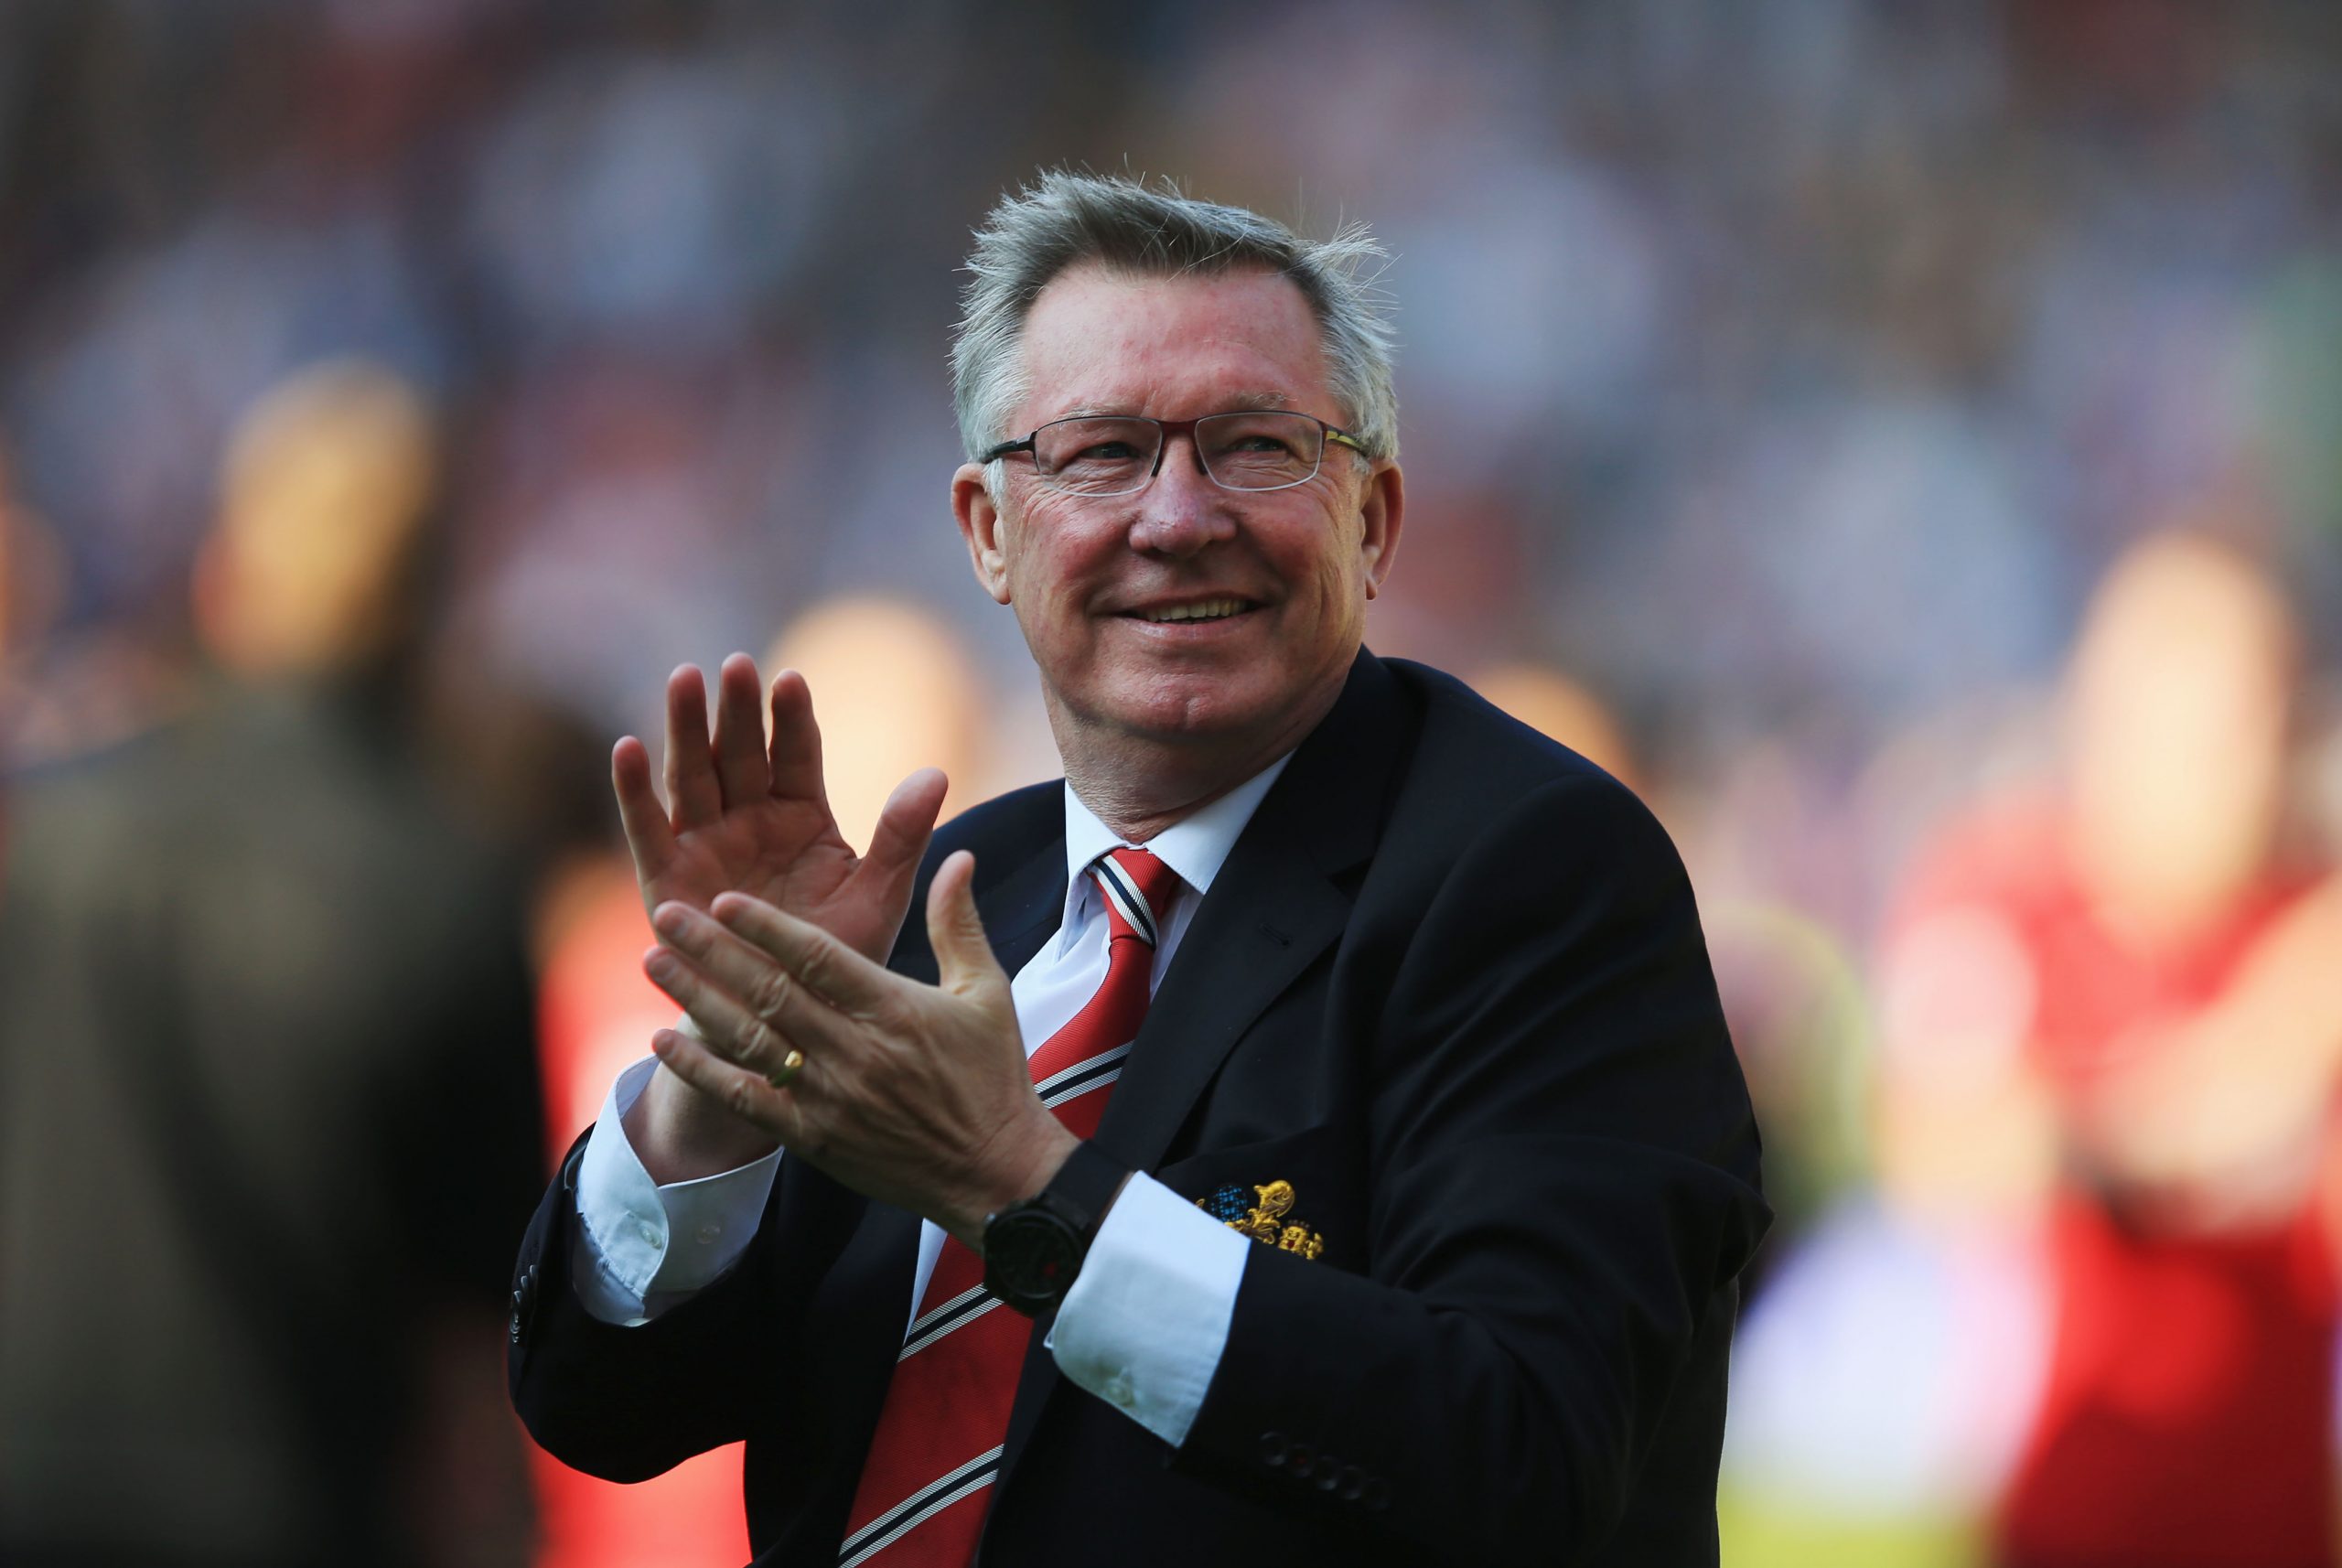 Sir Alex Ferguson has shown his respect and admiration towards young Marcus Rashford as the 23-year-old's campaign against food poverty gains momentum. (GETTY Images)